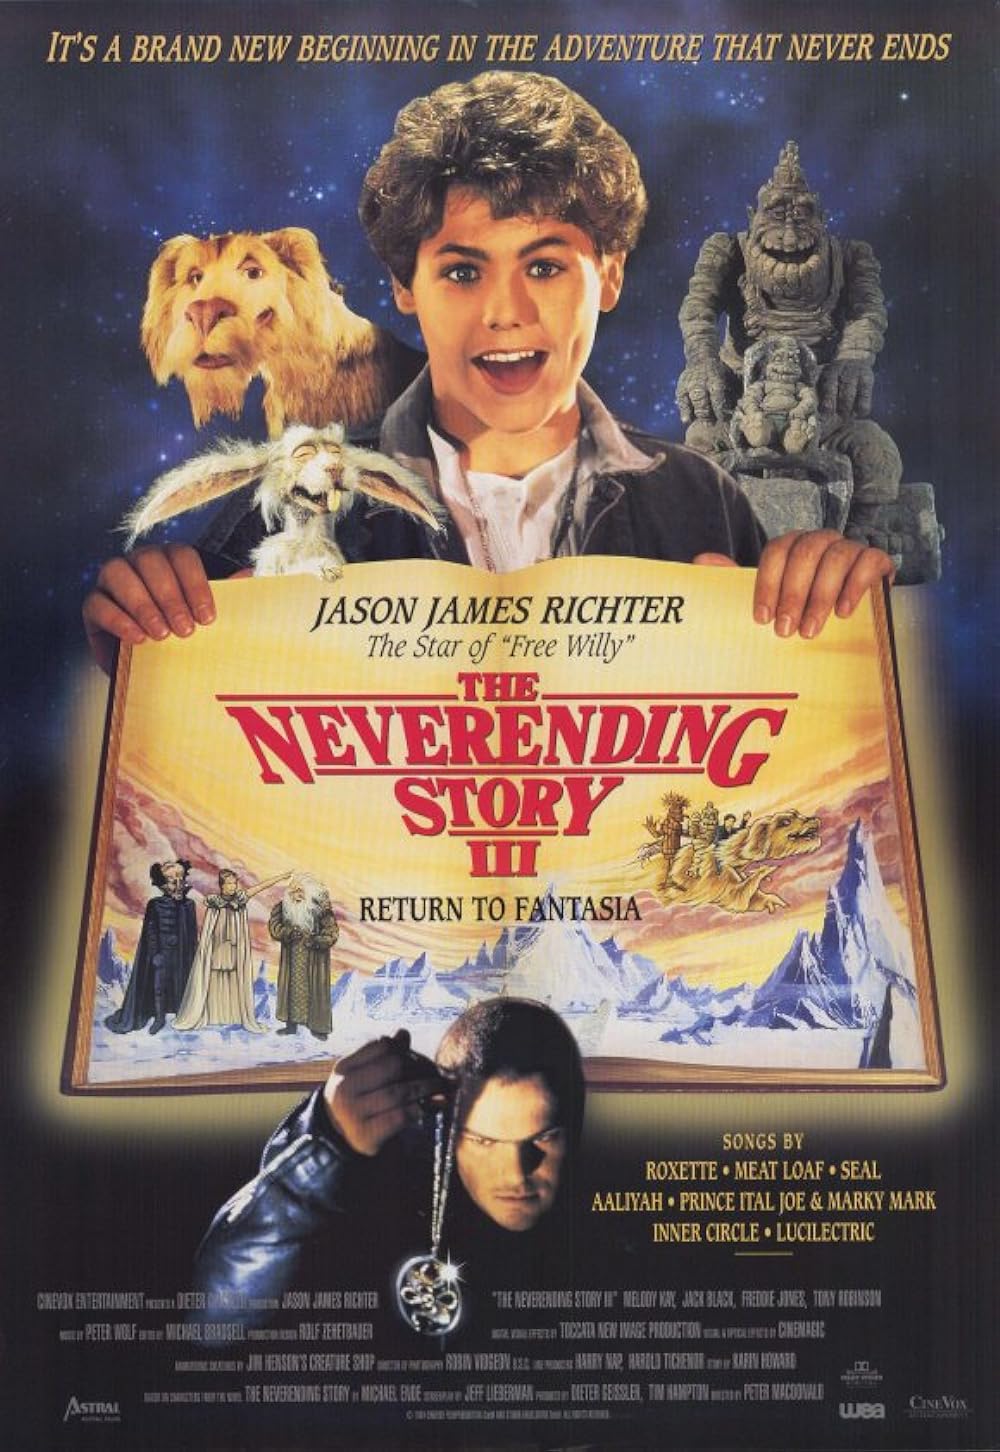 The Neverending Story III: Escape from Fantasia